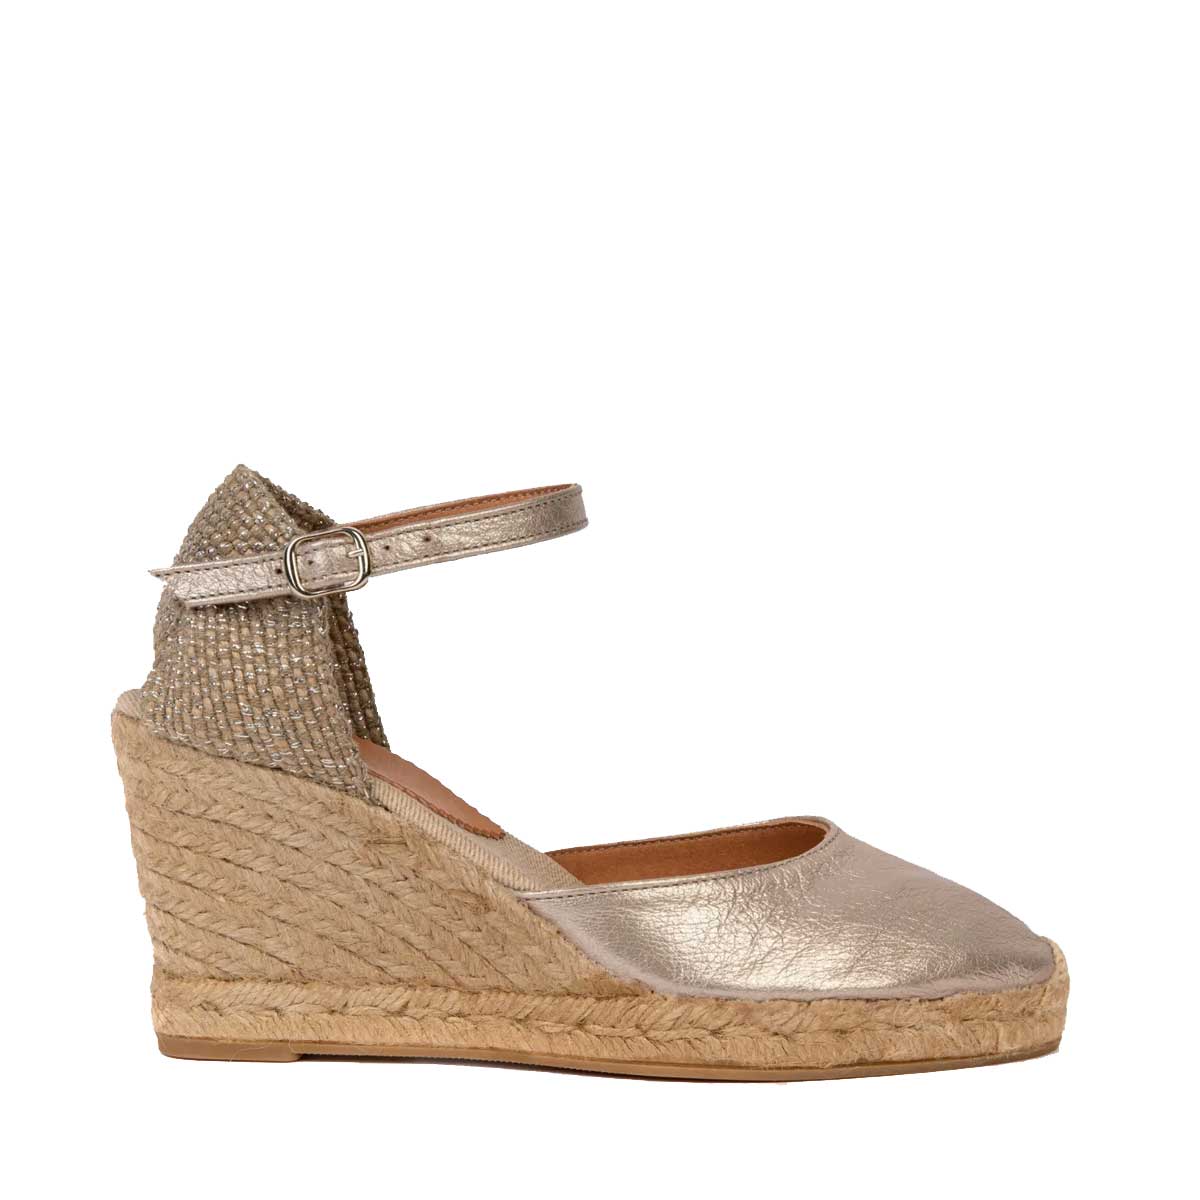 Penelope Chilvers High Mary Jane Metallic Leather Espadrille - Women's -  Champagne